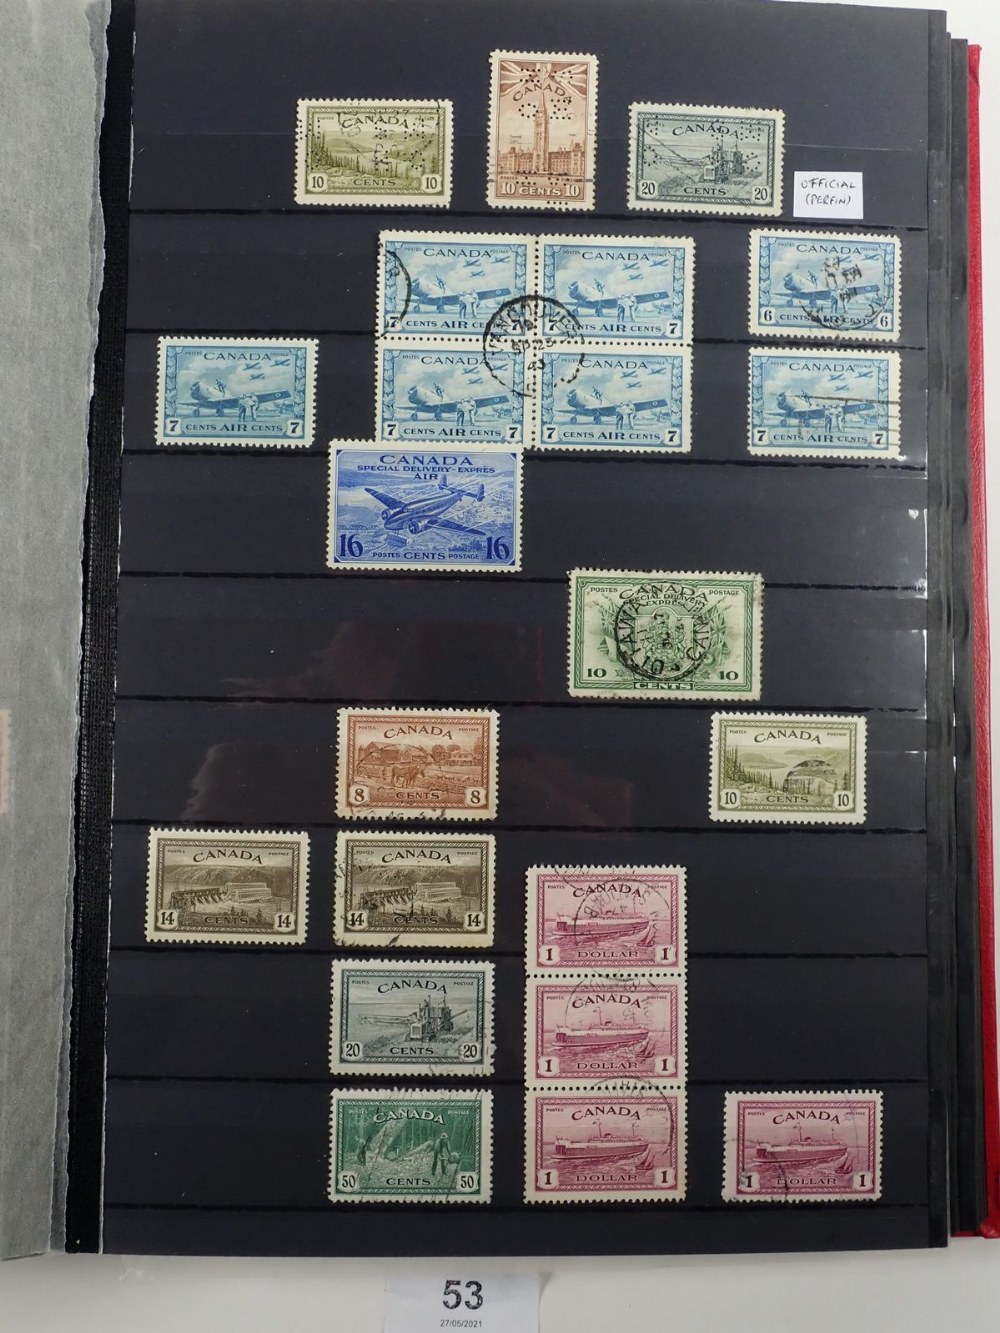 Canada & Provinces: Red 48 page Leuchtturm stock-book full of QV-QEII mint & used issues from 1859- - Image 9 of 17